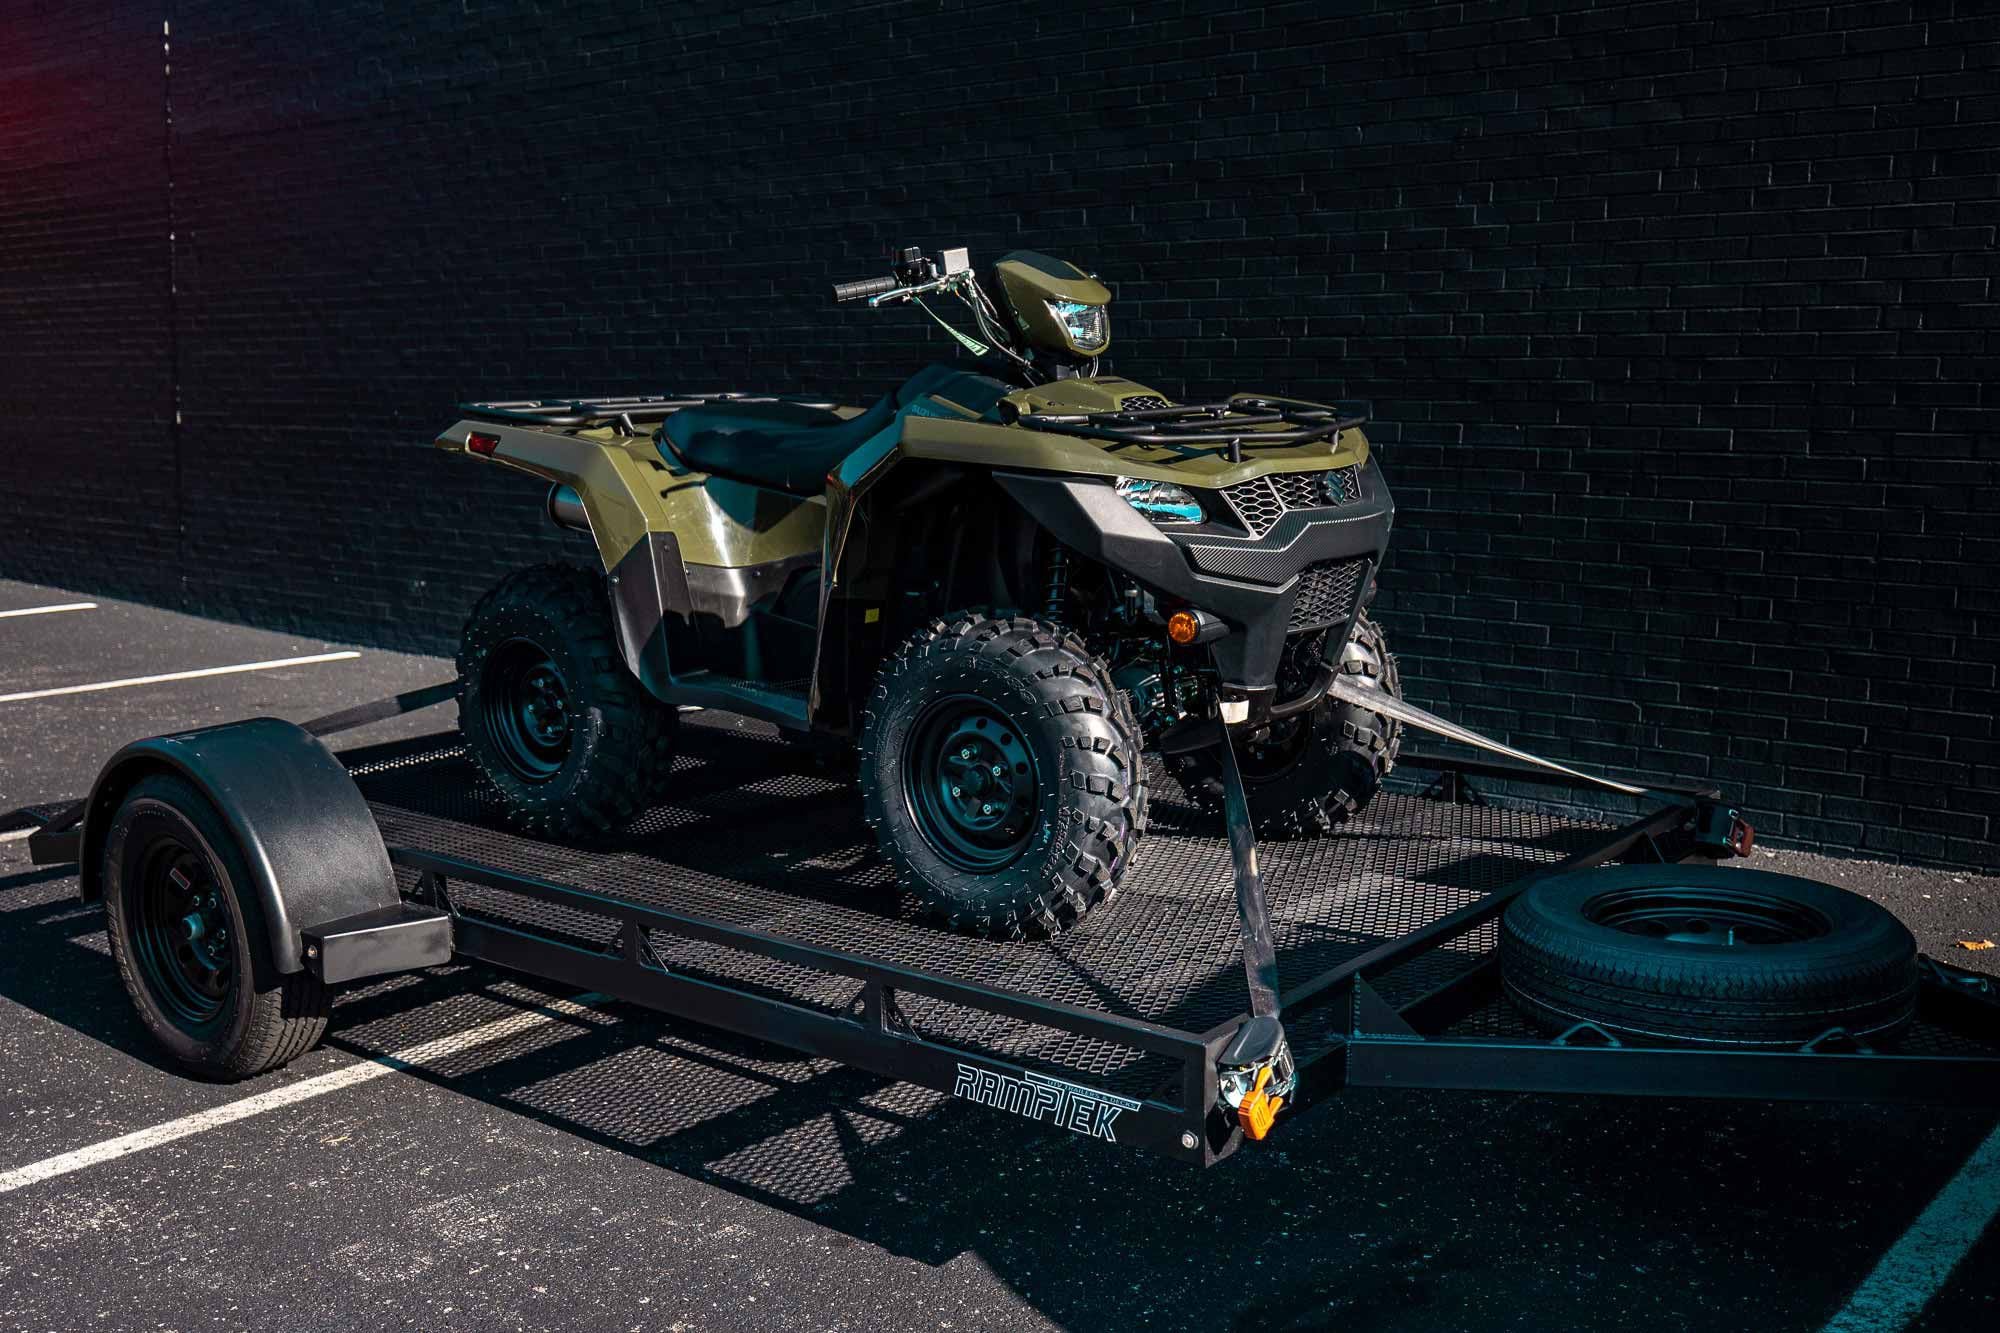 The Ramptek trailer is made specifically for the powersports industry customer who needs to tow their rig to the trail.